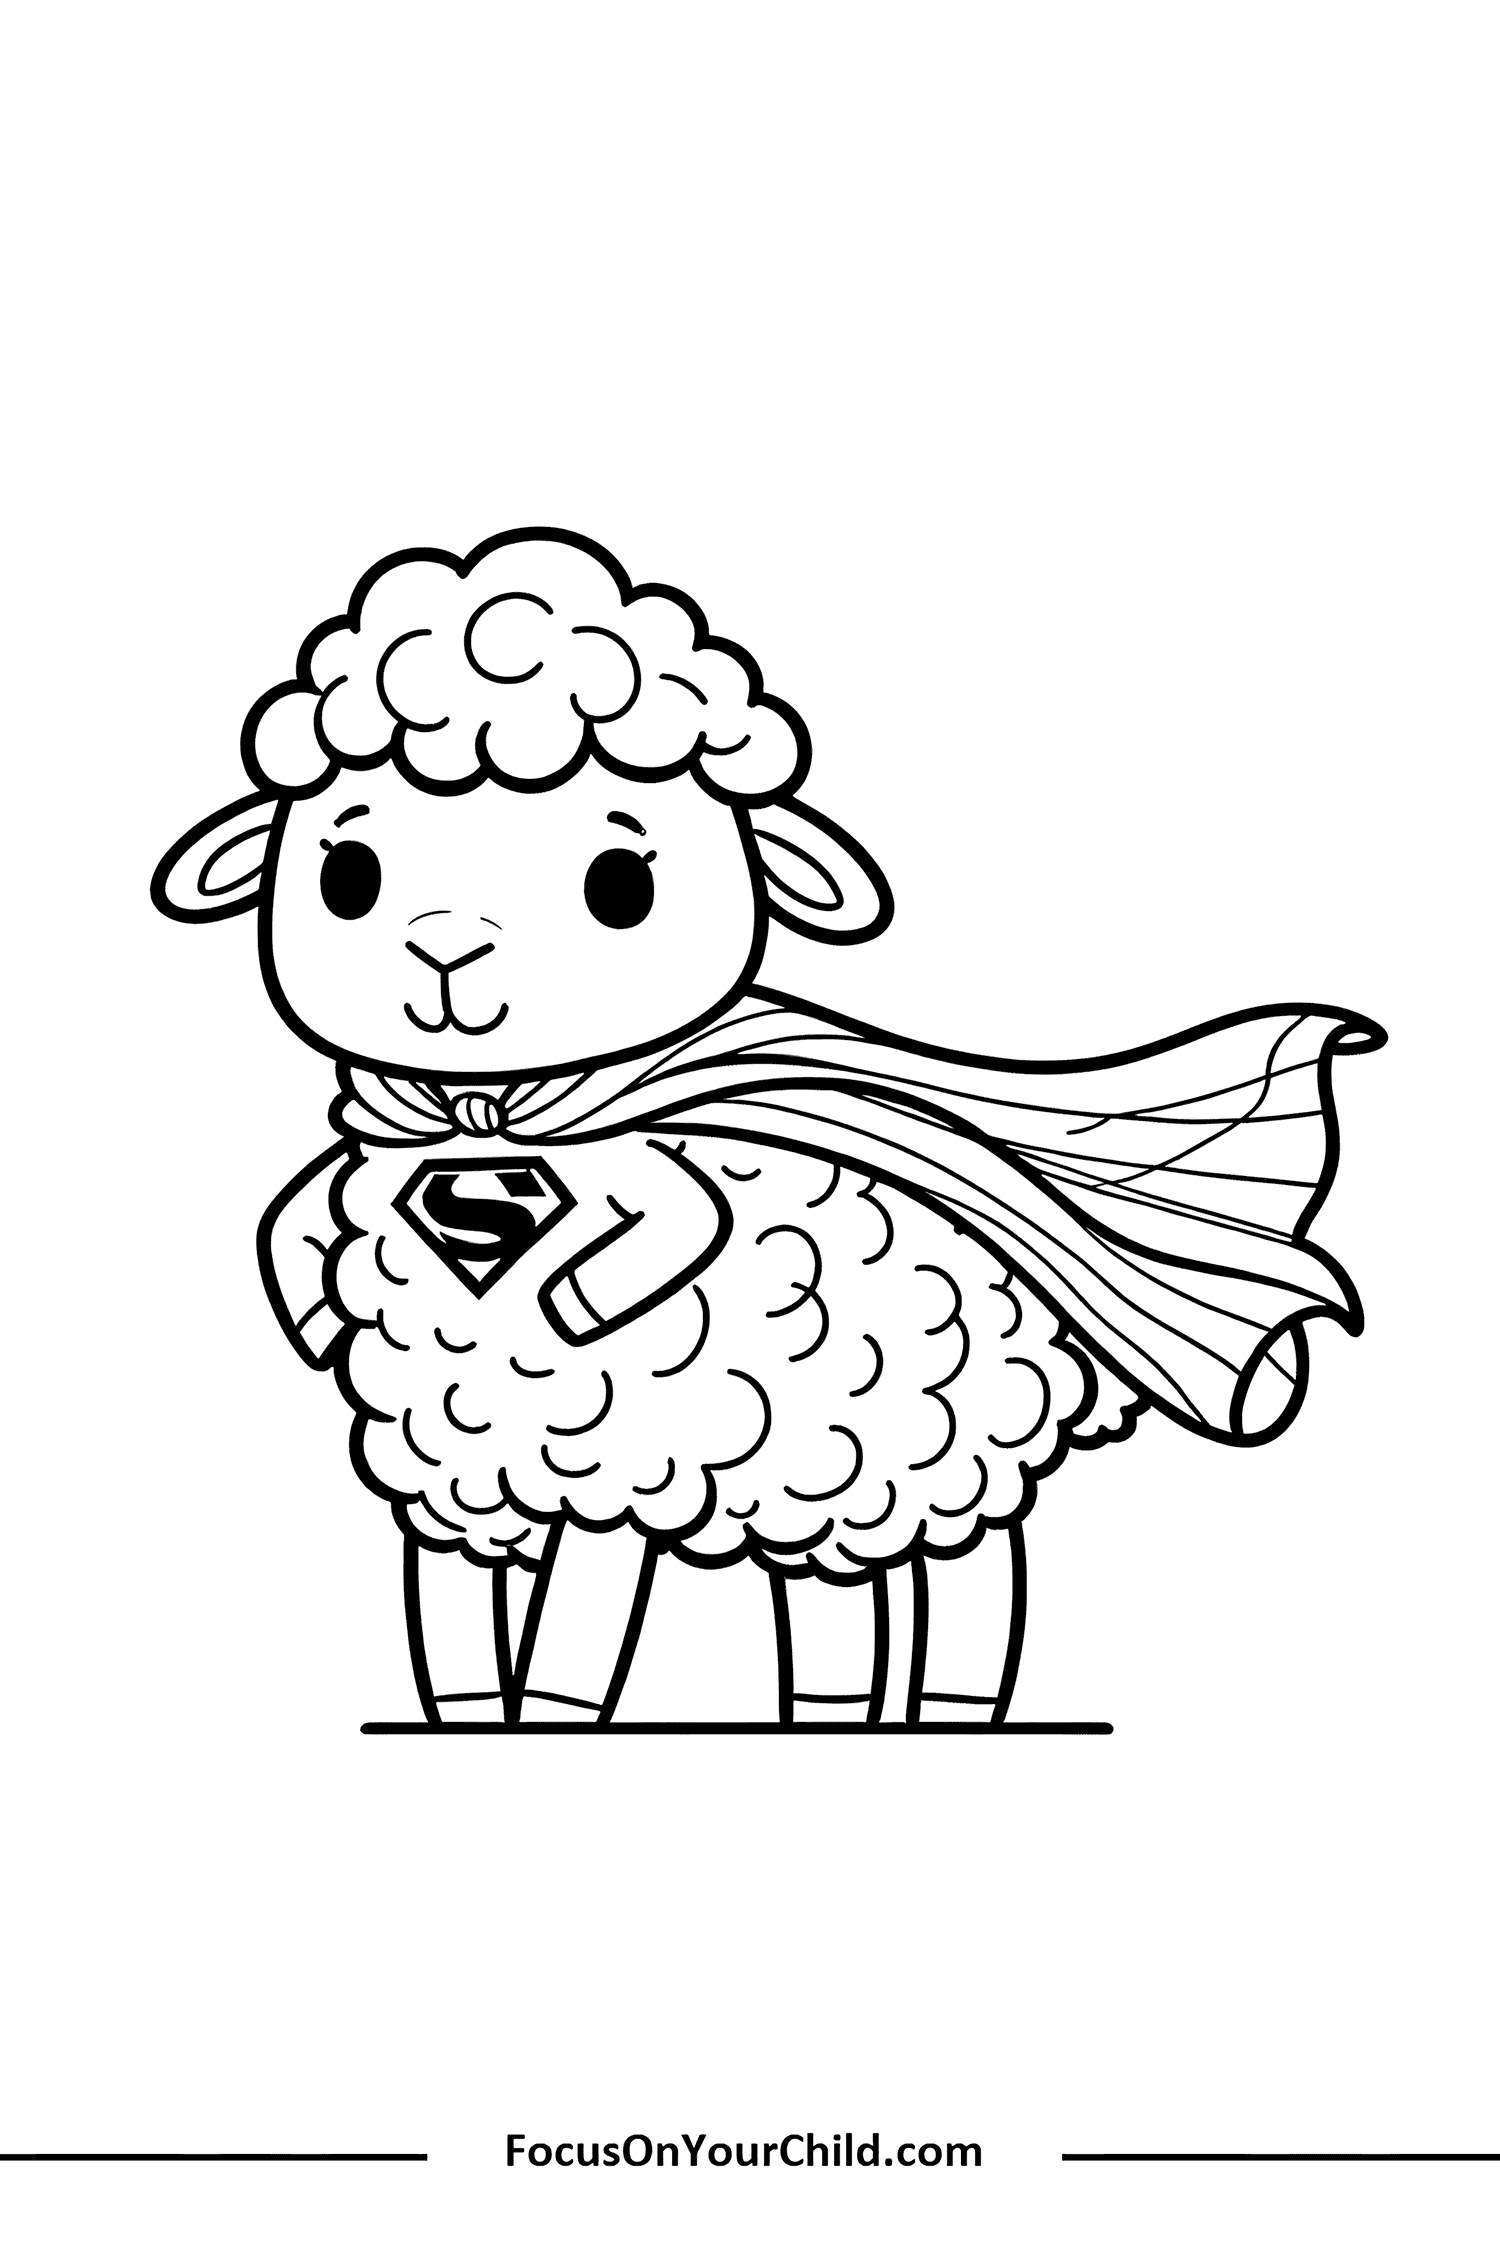 Cute lamb superhero in black and white outline drawing for childrens coloring page.